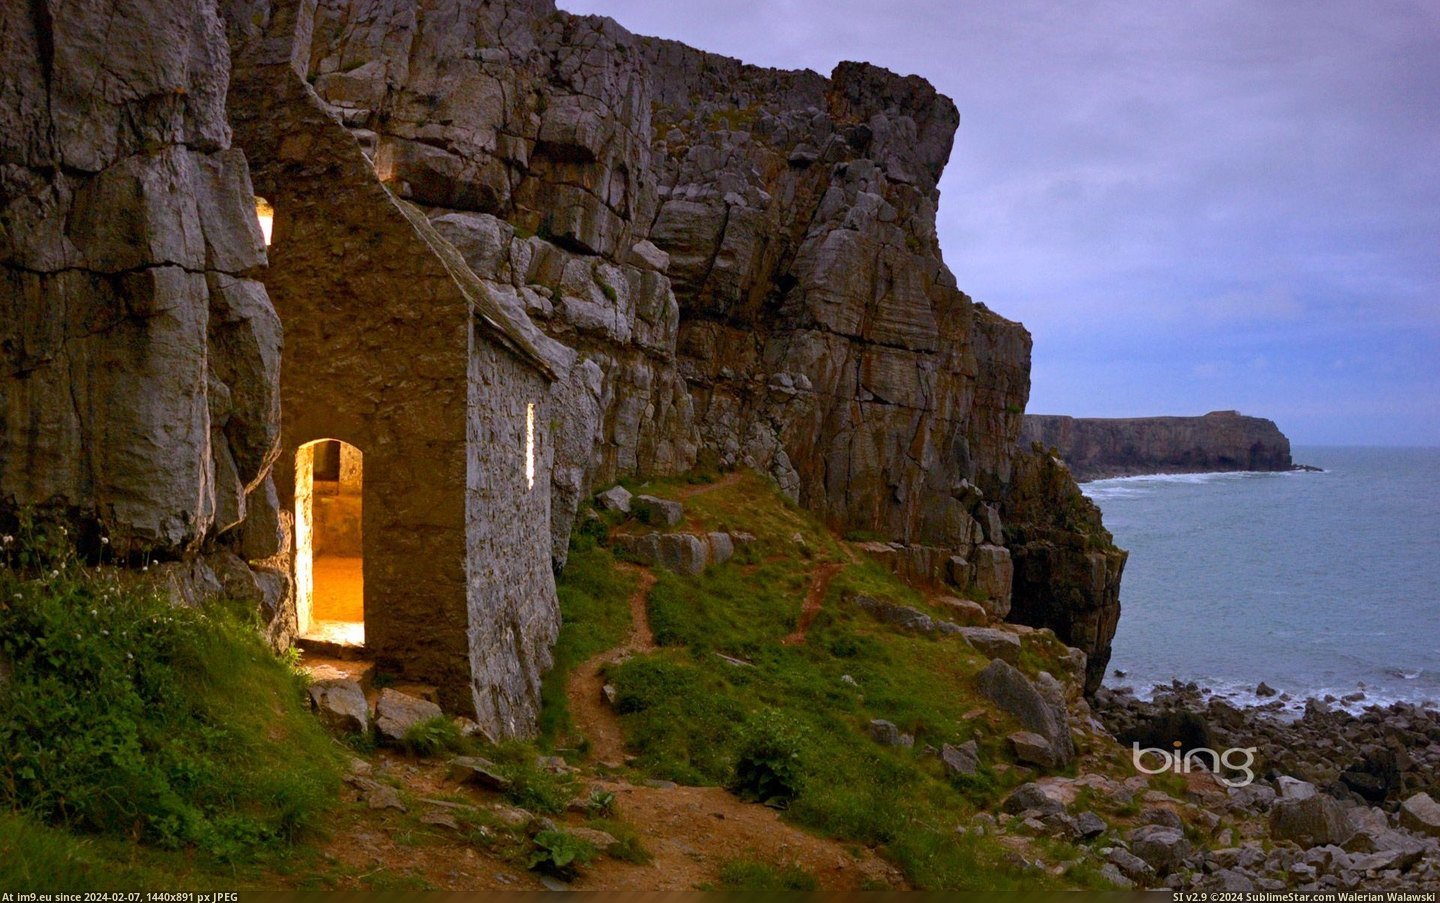 Saint Govan's Chapel in Pembrokeshire Coast National Park, Dyfed, Wales (Getty Images) 2013-03-01 (in Best photos of March 2013)